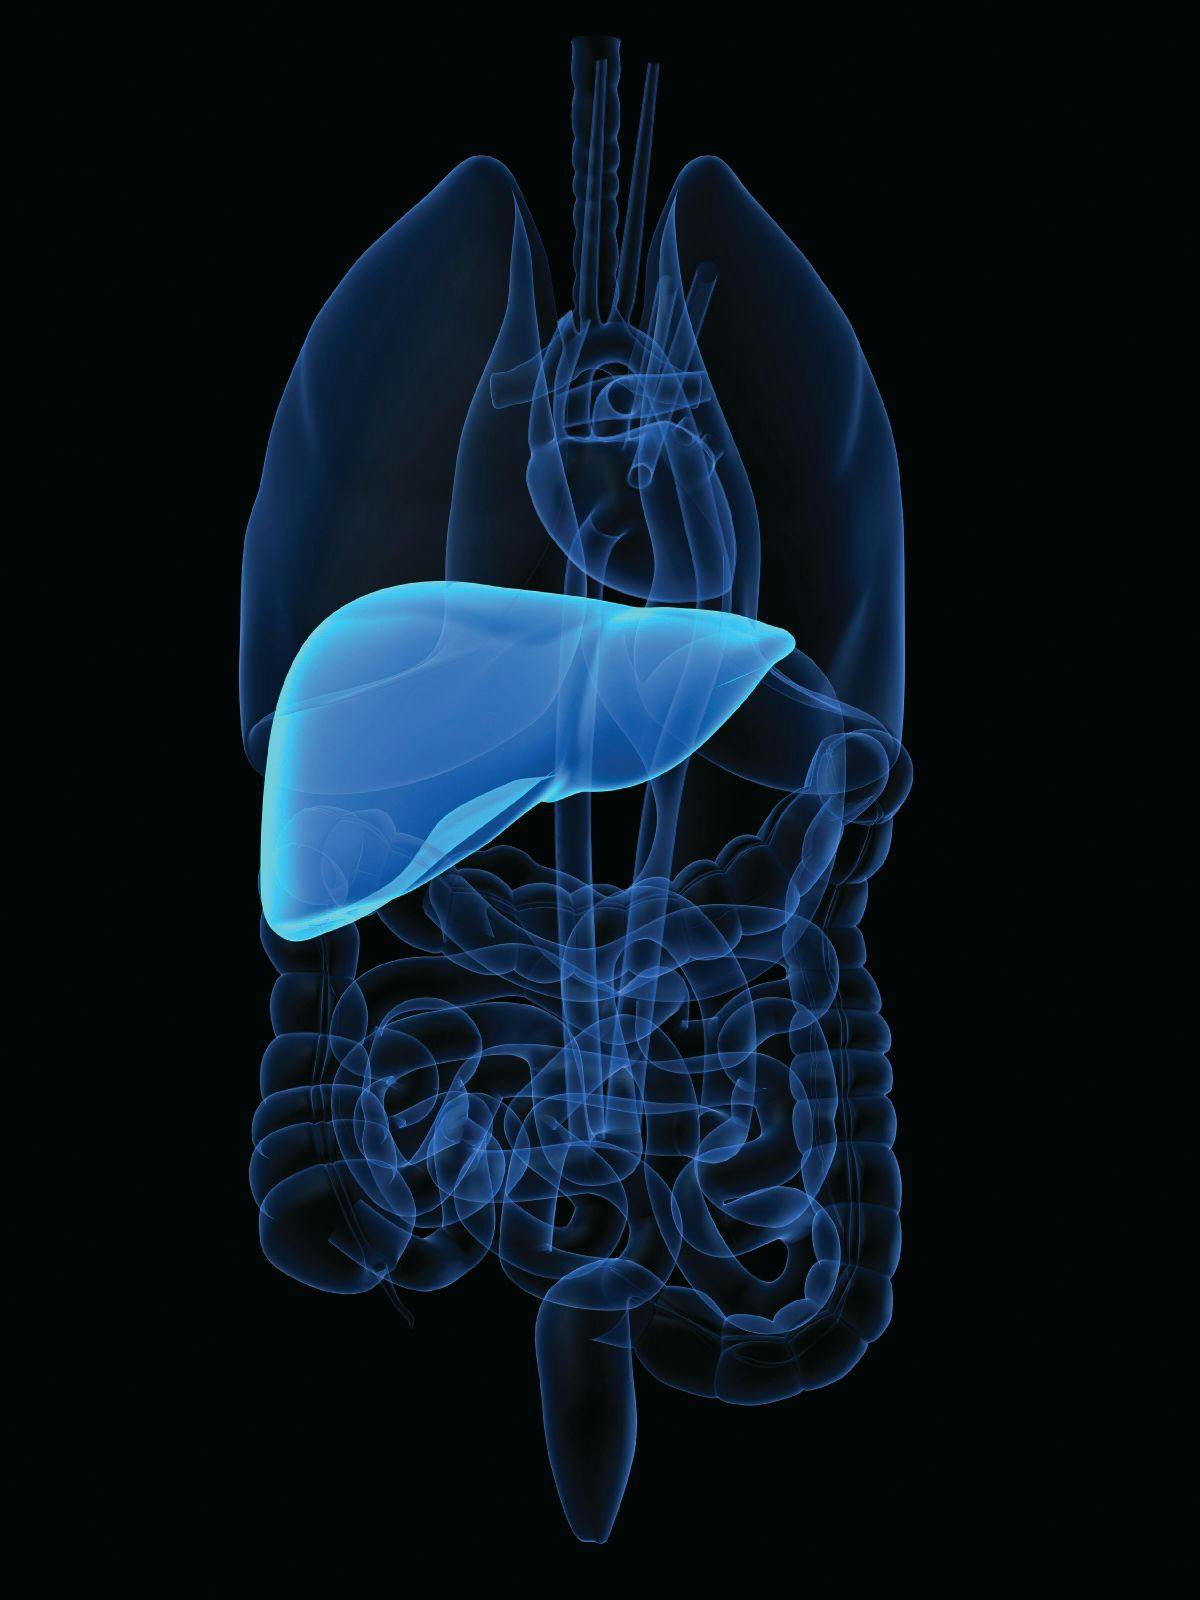 According to findings from a phase 2 clinical study, futibatinib may achieve benefit in patients with intrahepatic cholangiocarcinoma harboring FGFR2¬ rearrangements.